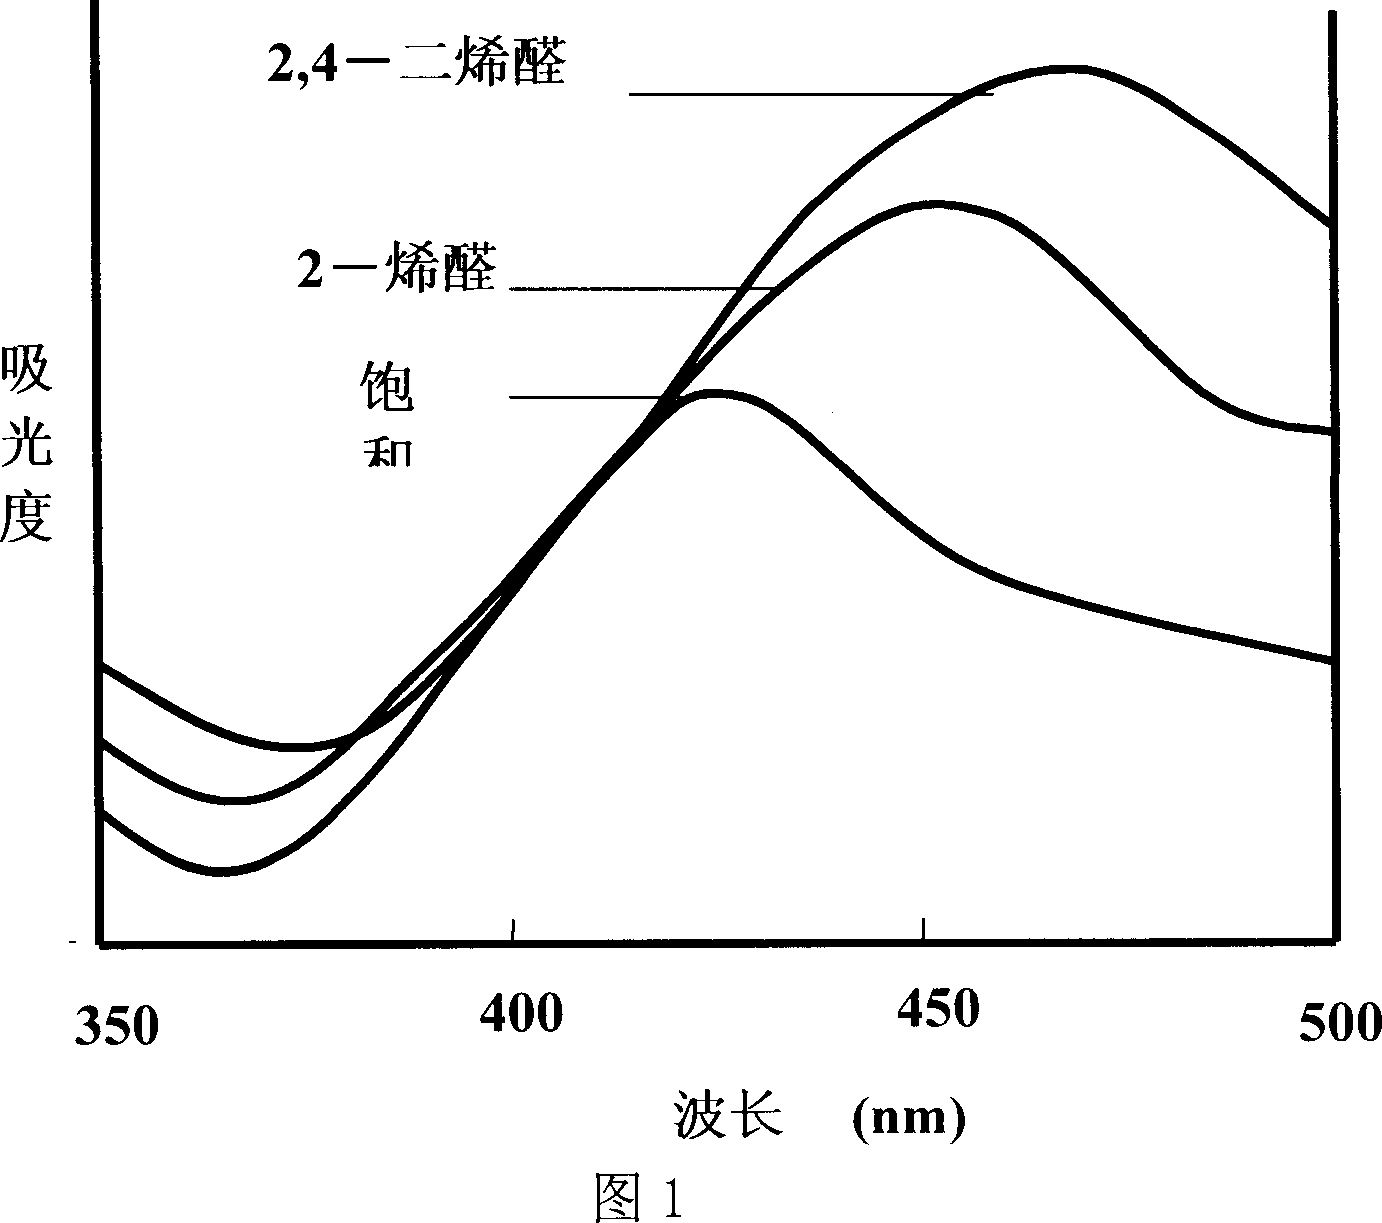 Process of measuring carbonyl compound content in oil and grease